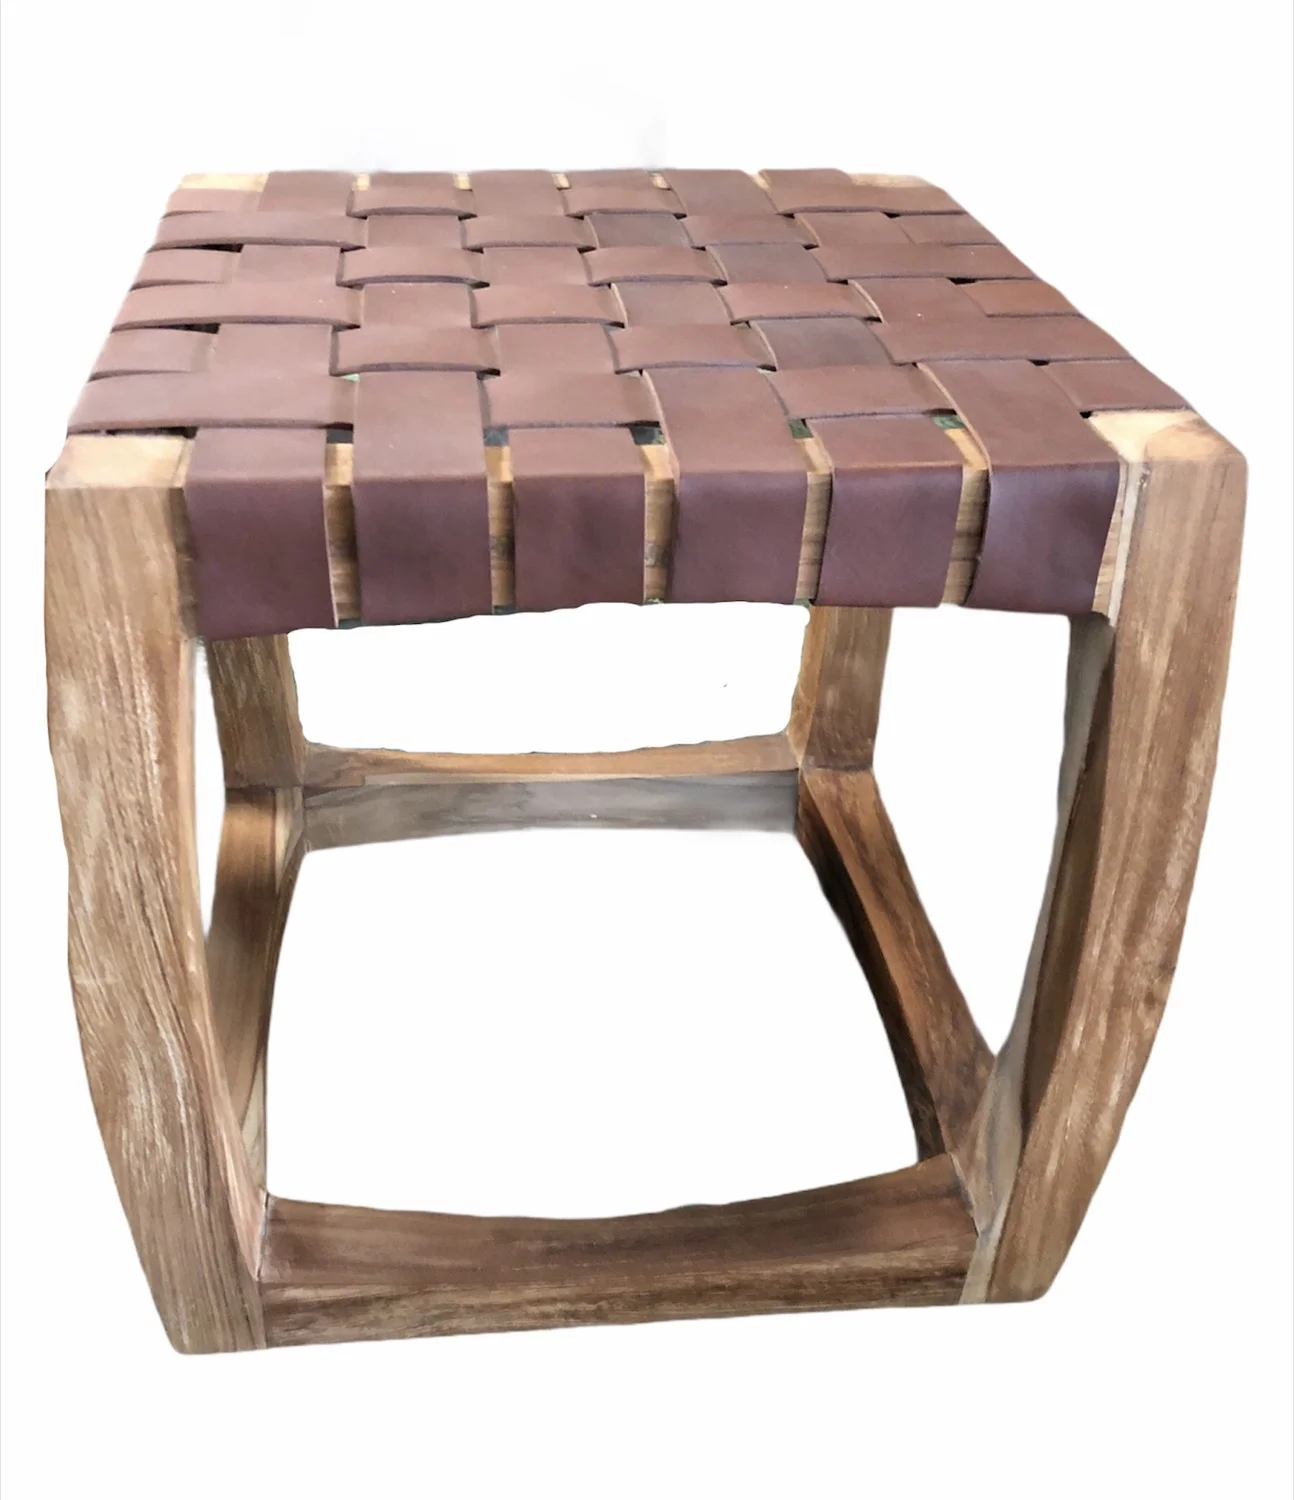 Wooden stool with woven leather seat - Tabouret en bois assise cuir tressée